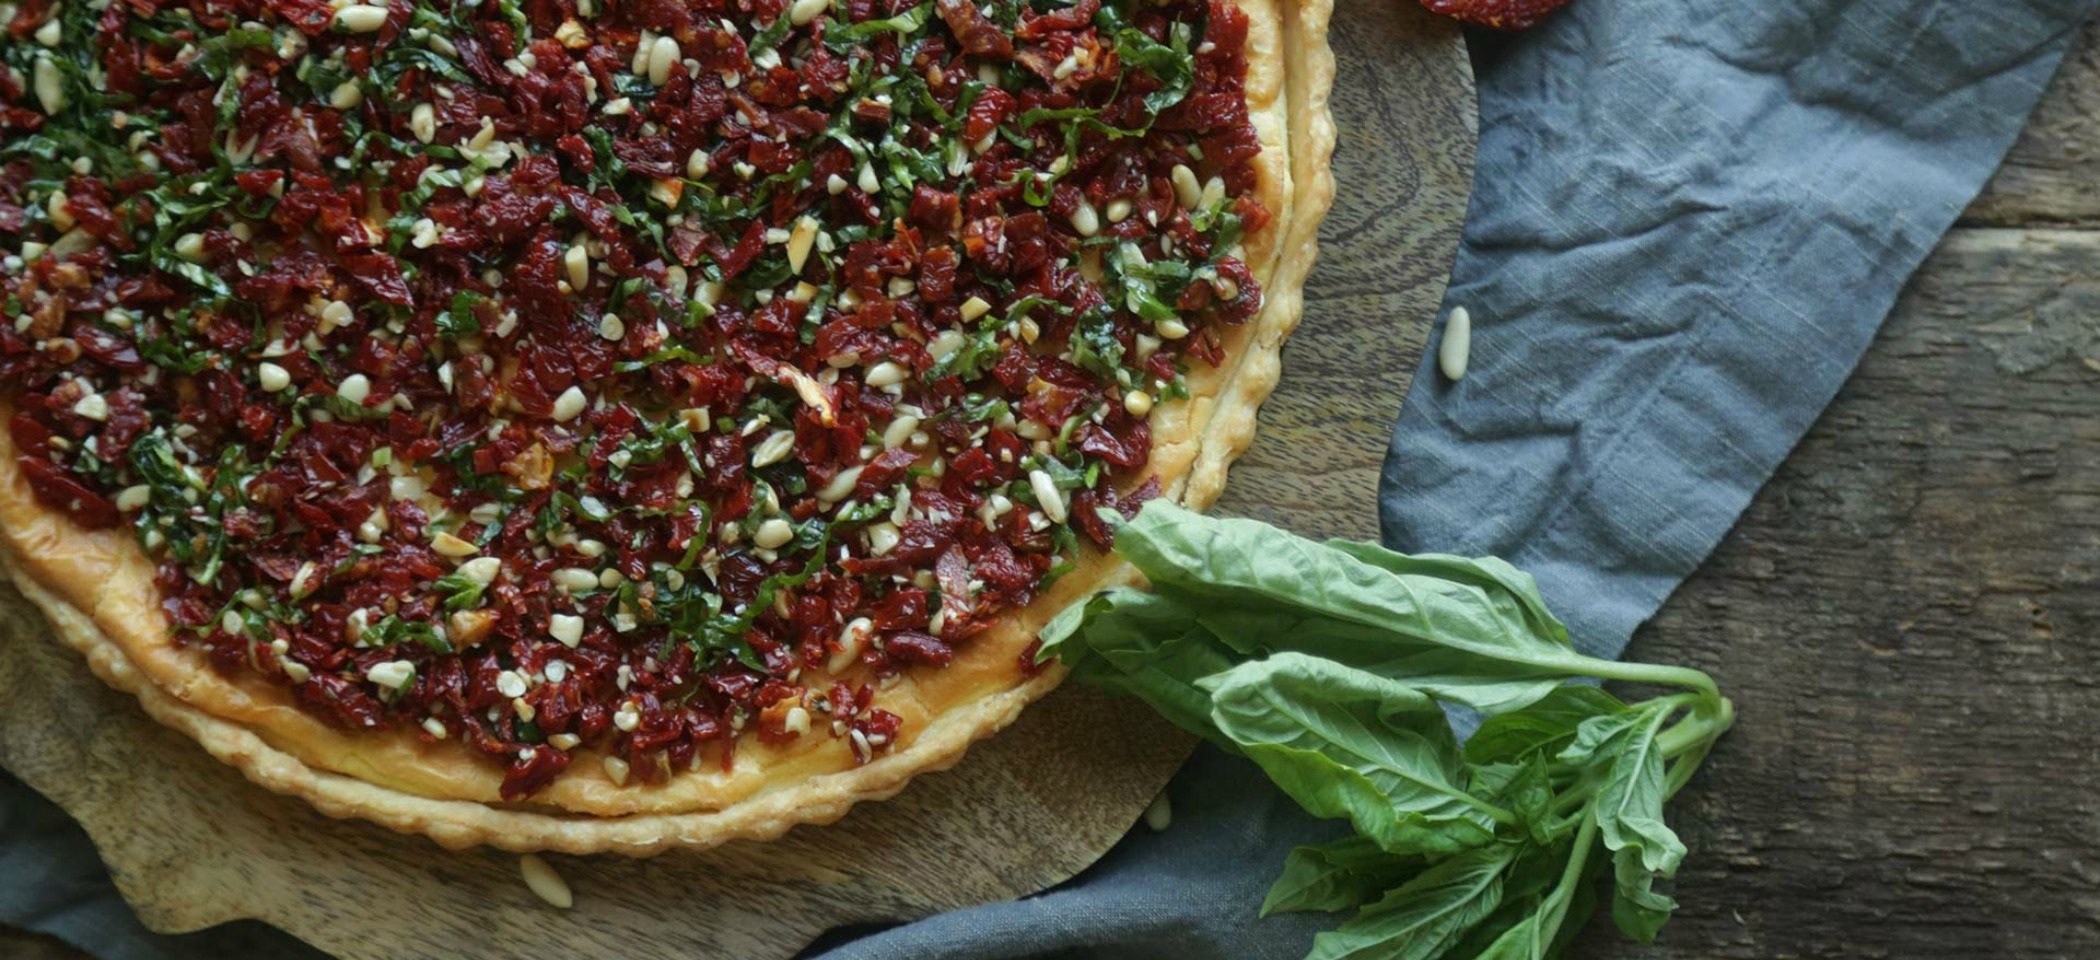 Goat Cheese Tart with Sundried Tomatoes, Pine Nuts + Basil